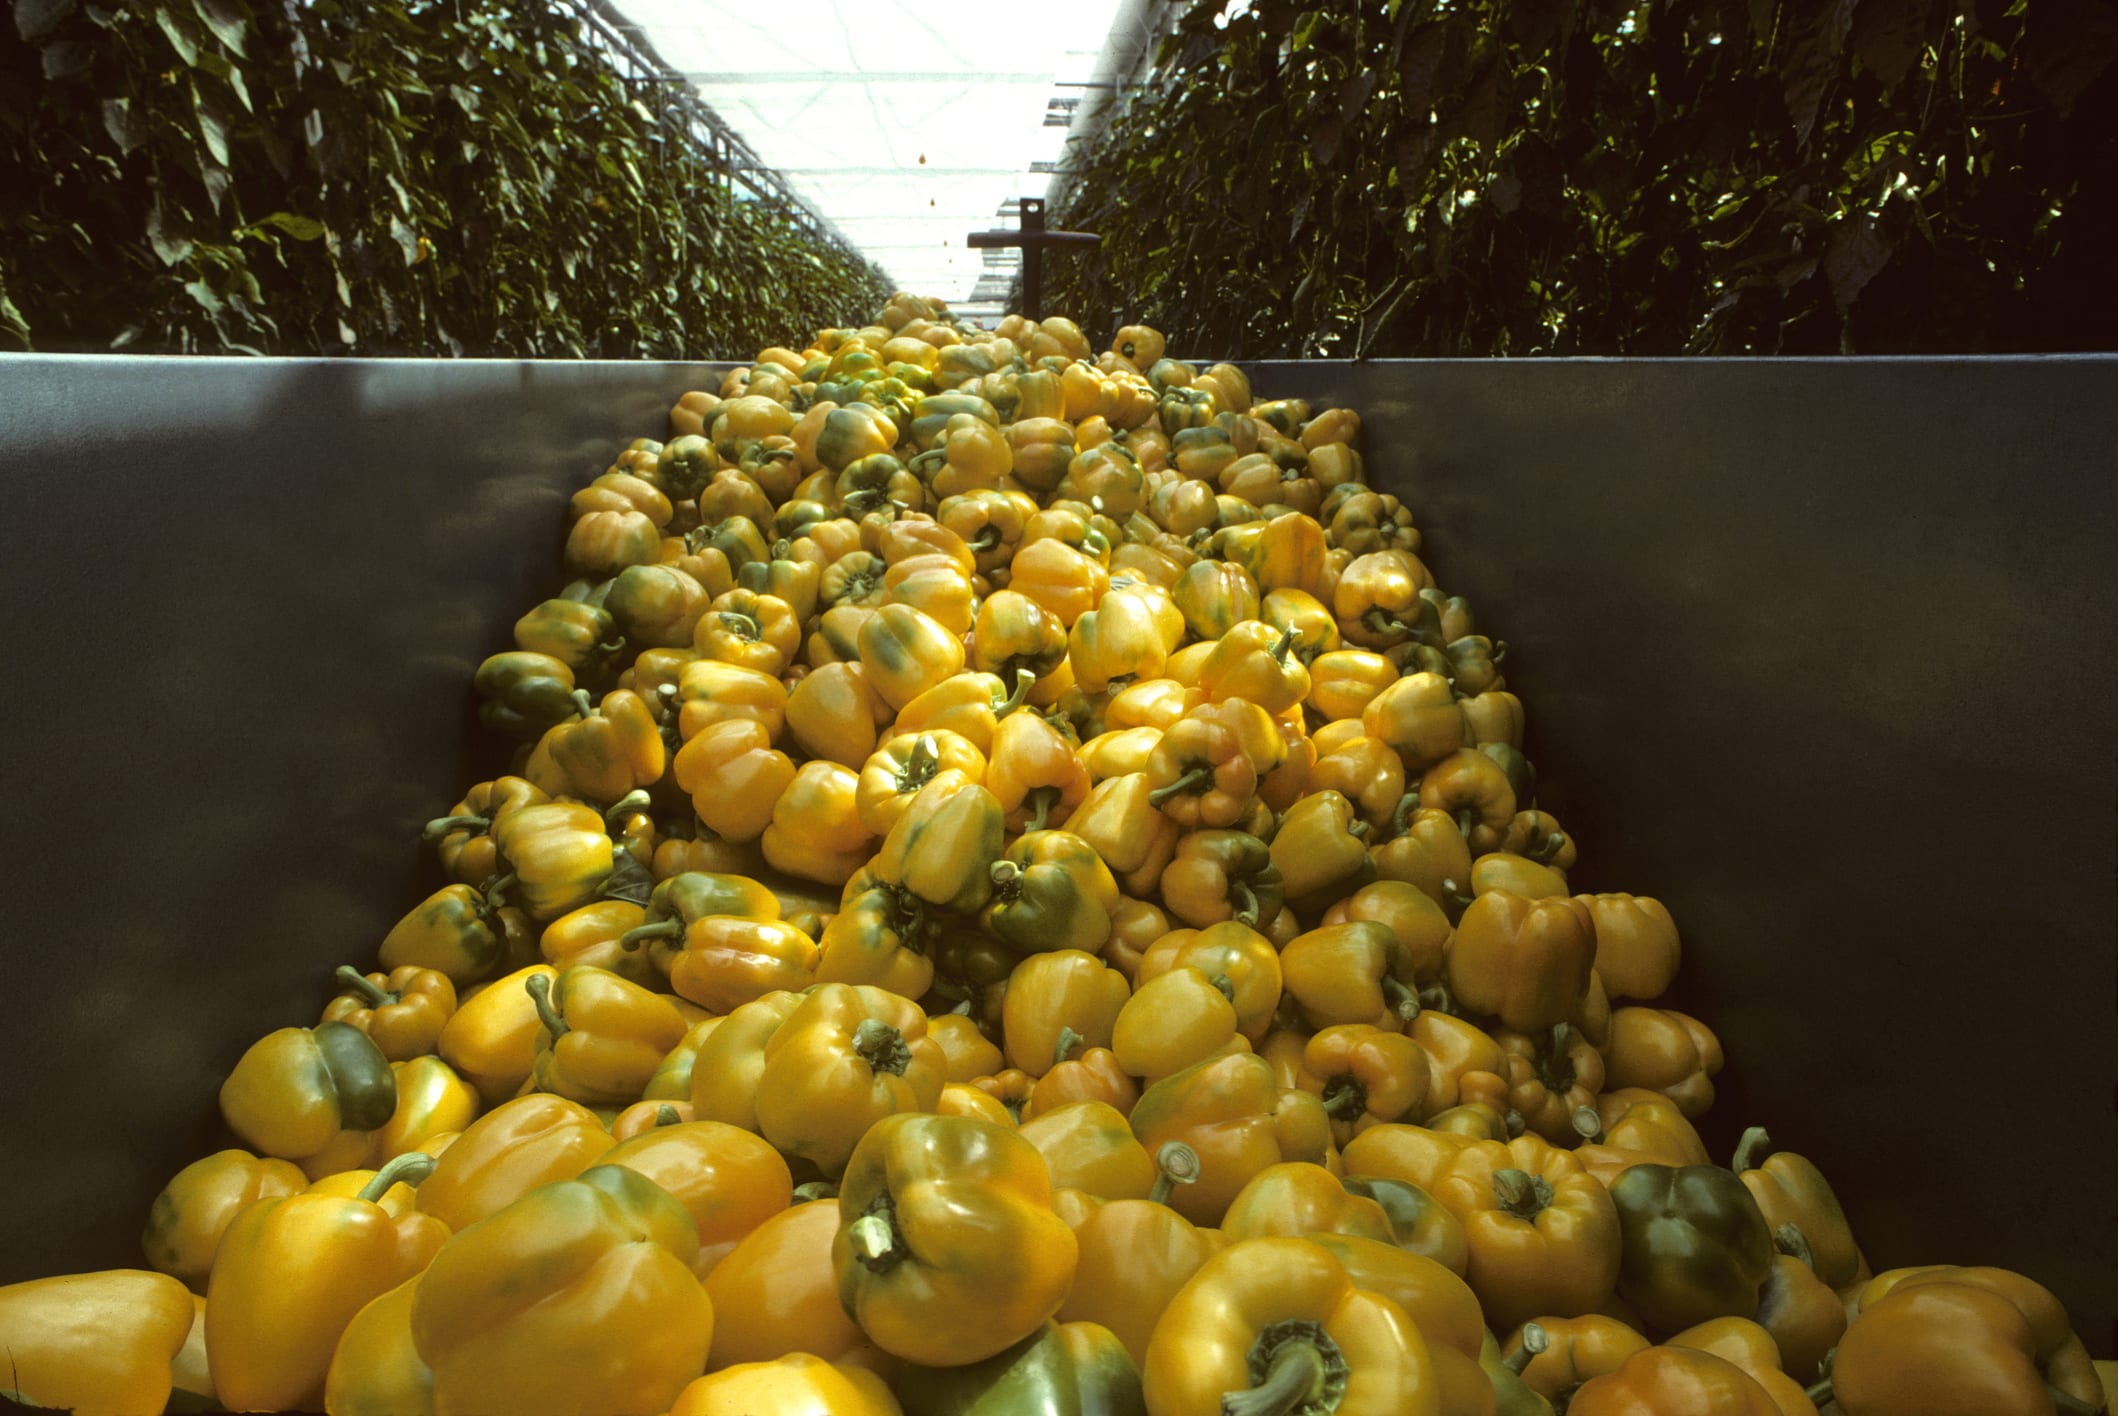 How renewables and greenhouses are teaming up to grow fruits and vegetablesOne company that has developed sustainable tech for the greenhouse se...